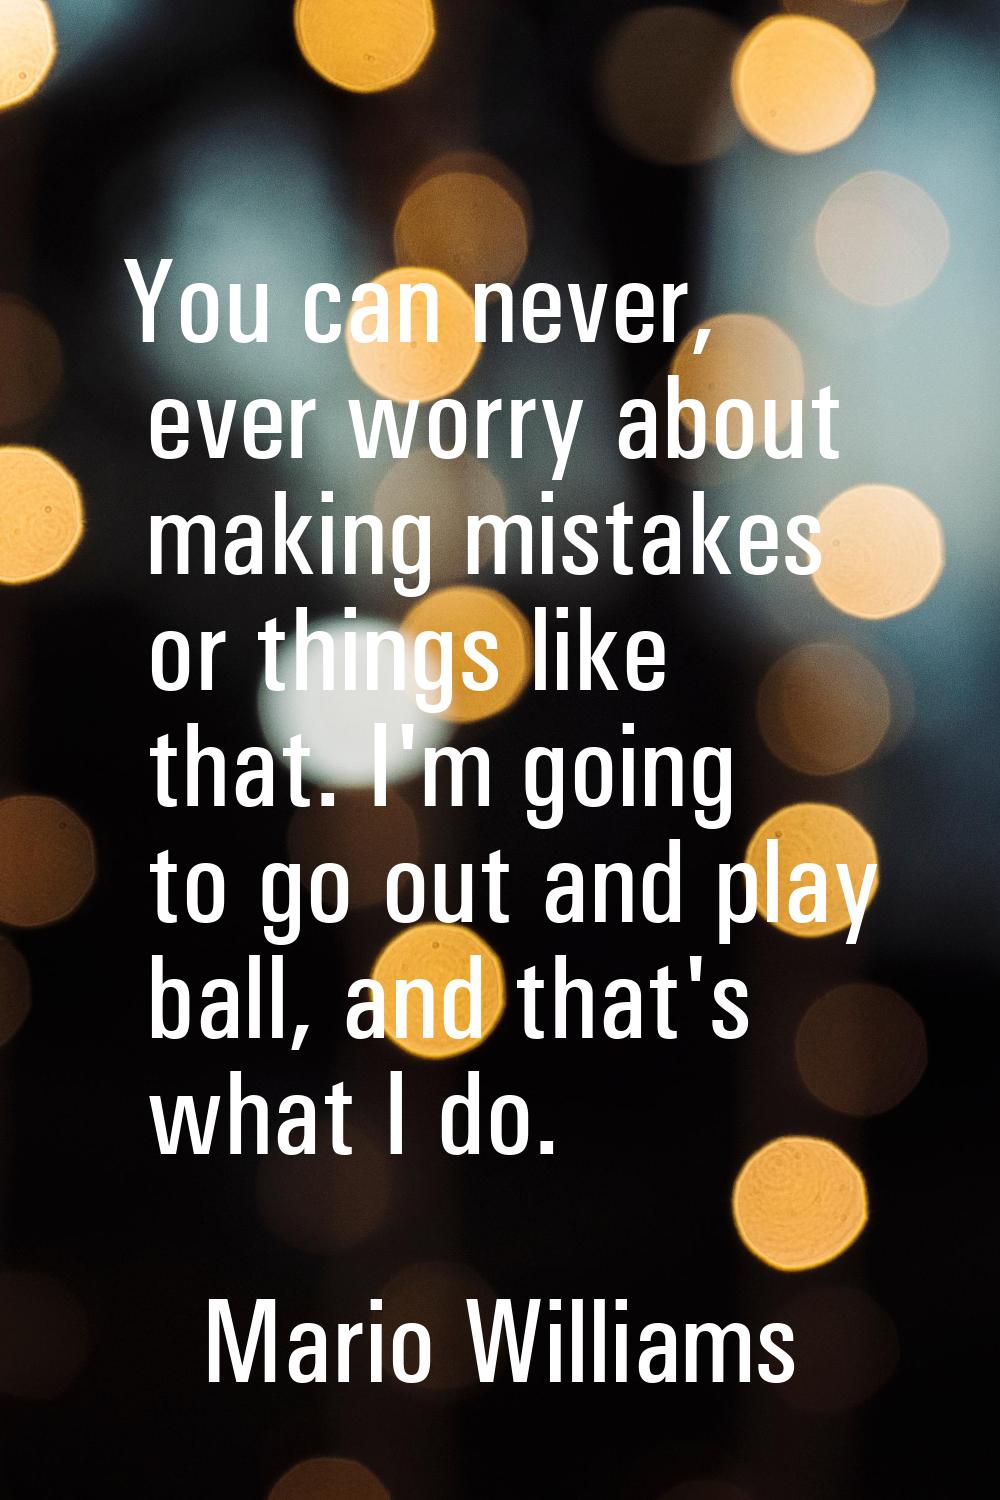 You can never, ever worry about making mistakes or things like that. I'm going to go out and play b